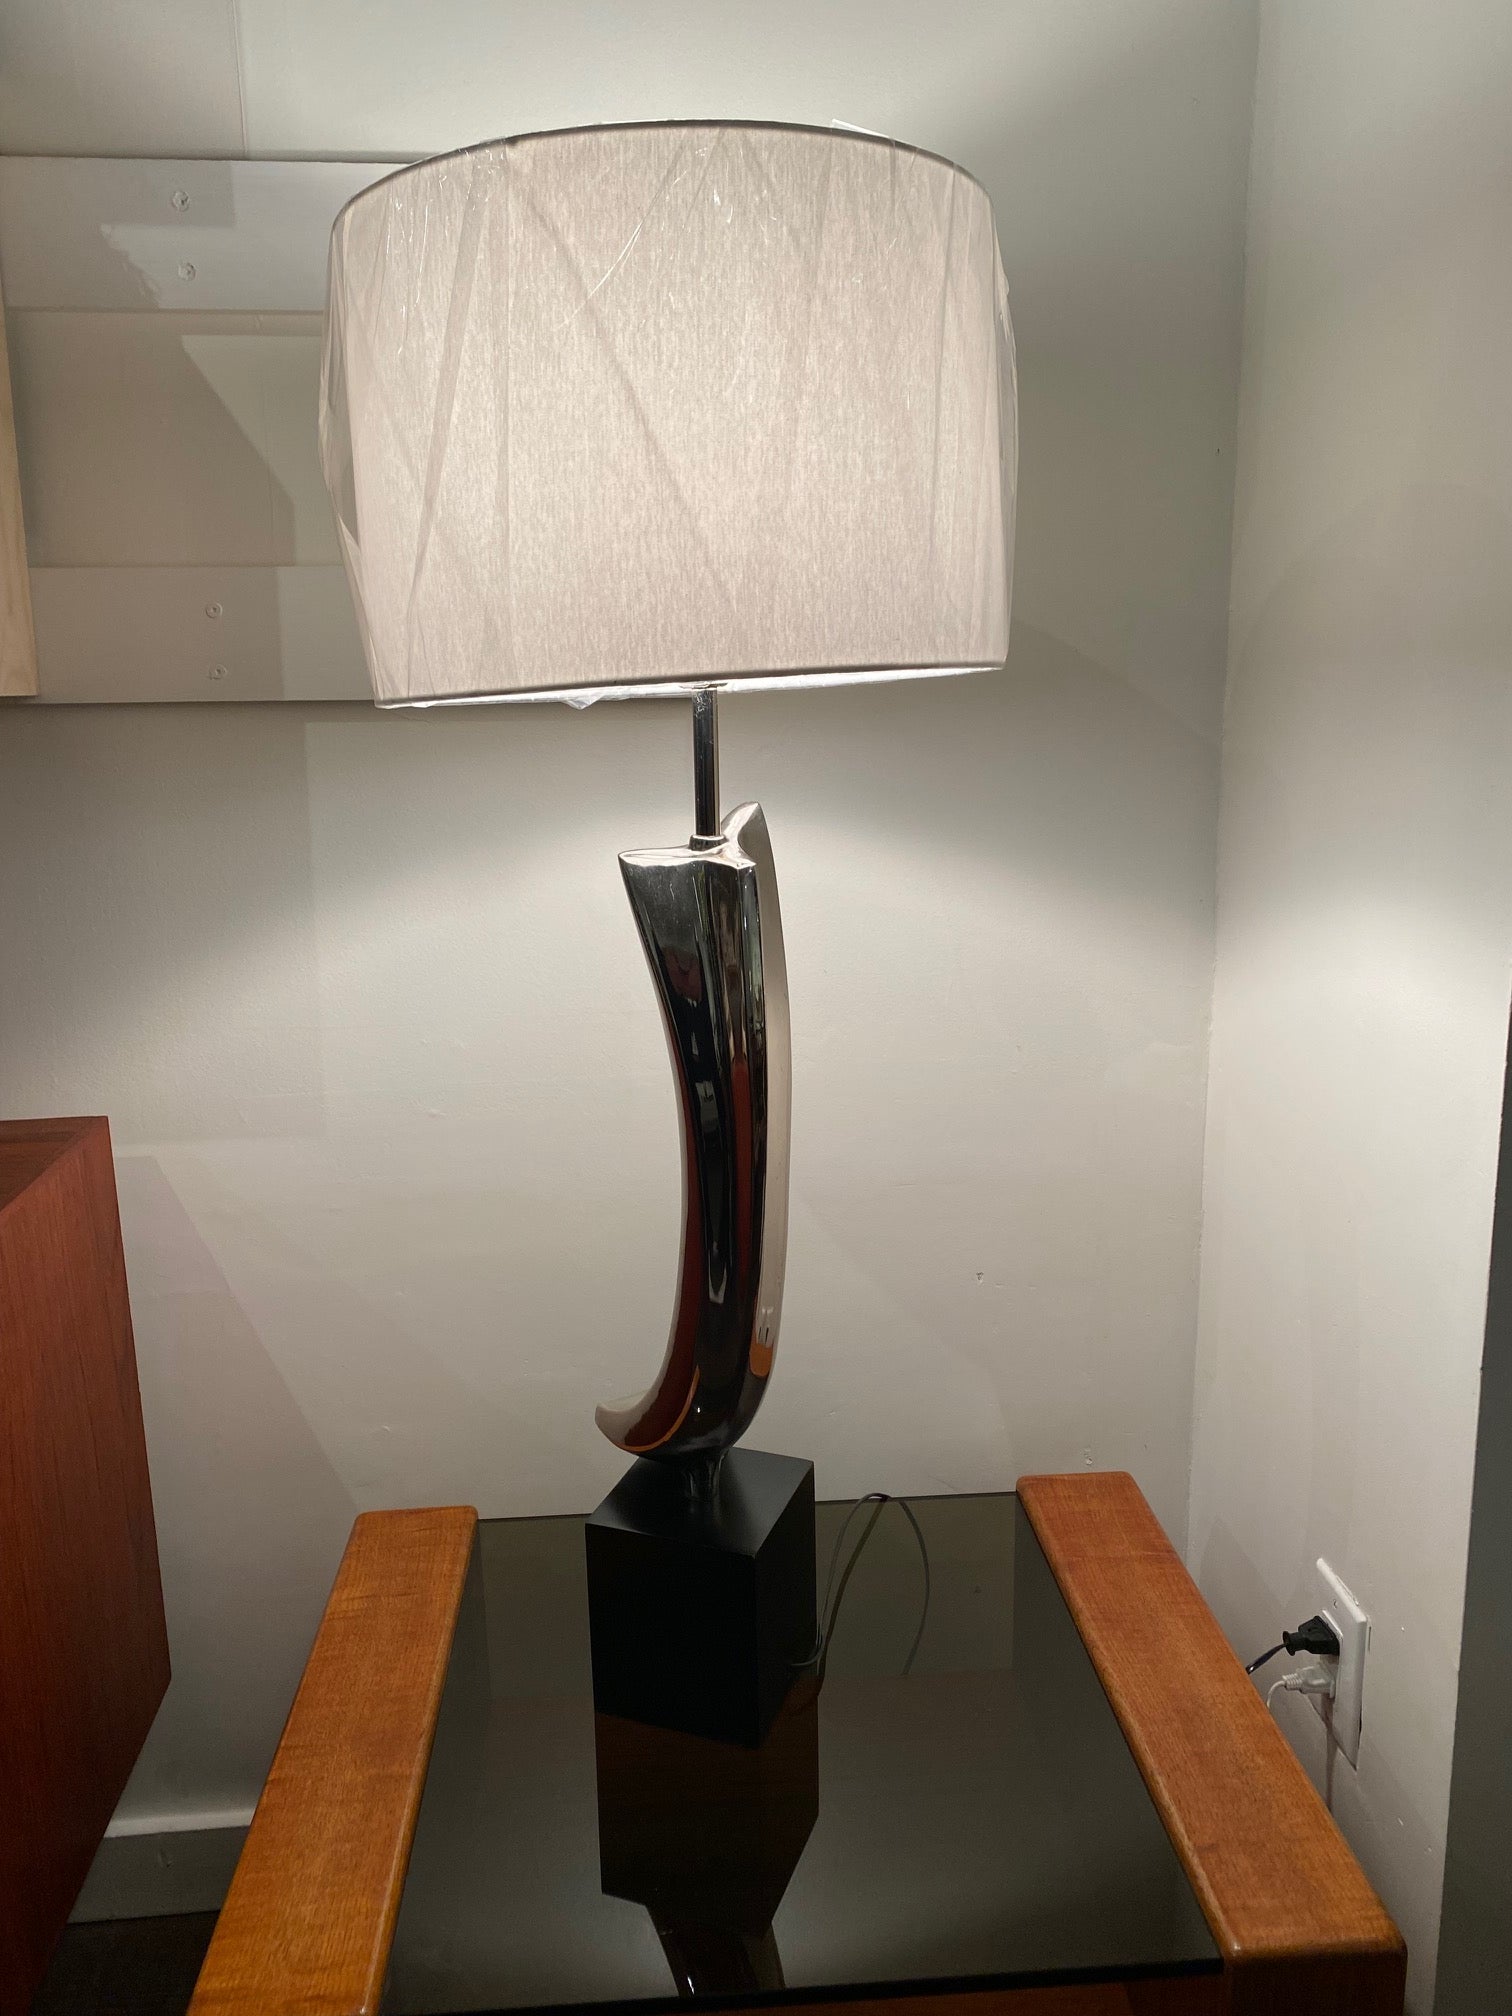 Incredible Laurel Table Lamp by Harold Weiss And Richard Barr. Black base with chrome. Designed by Harold Weiss and Richard Barr Laurel Lamp Company on a smoke glass and teak side table- Cook Street Vintage